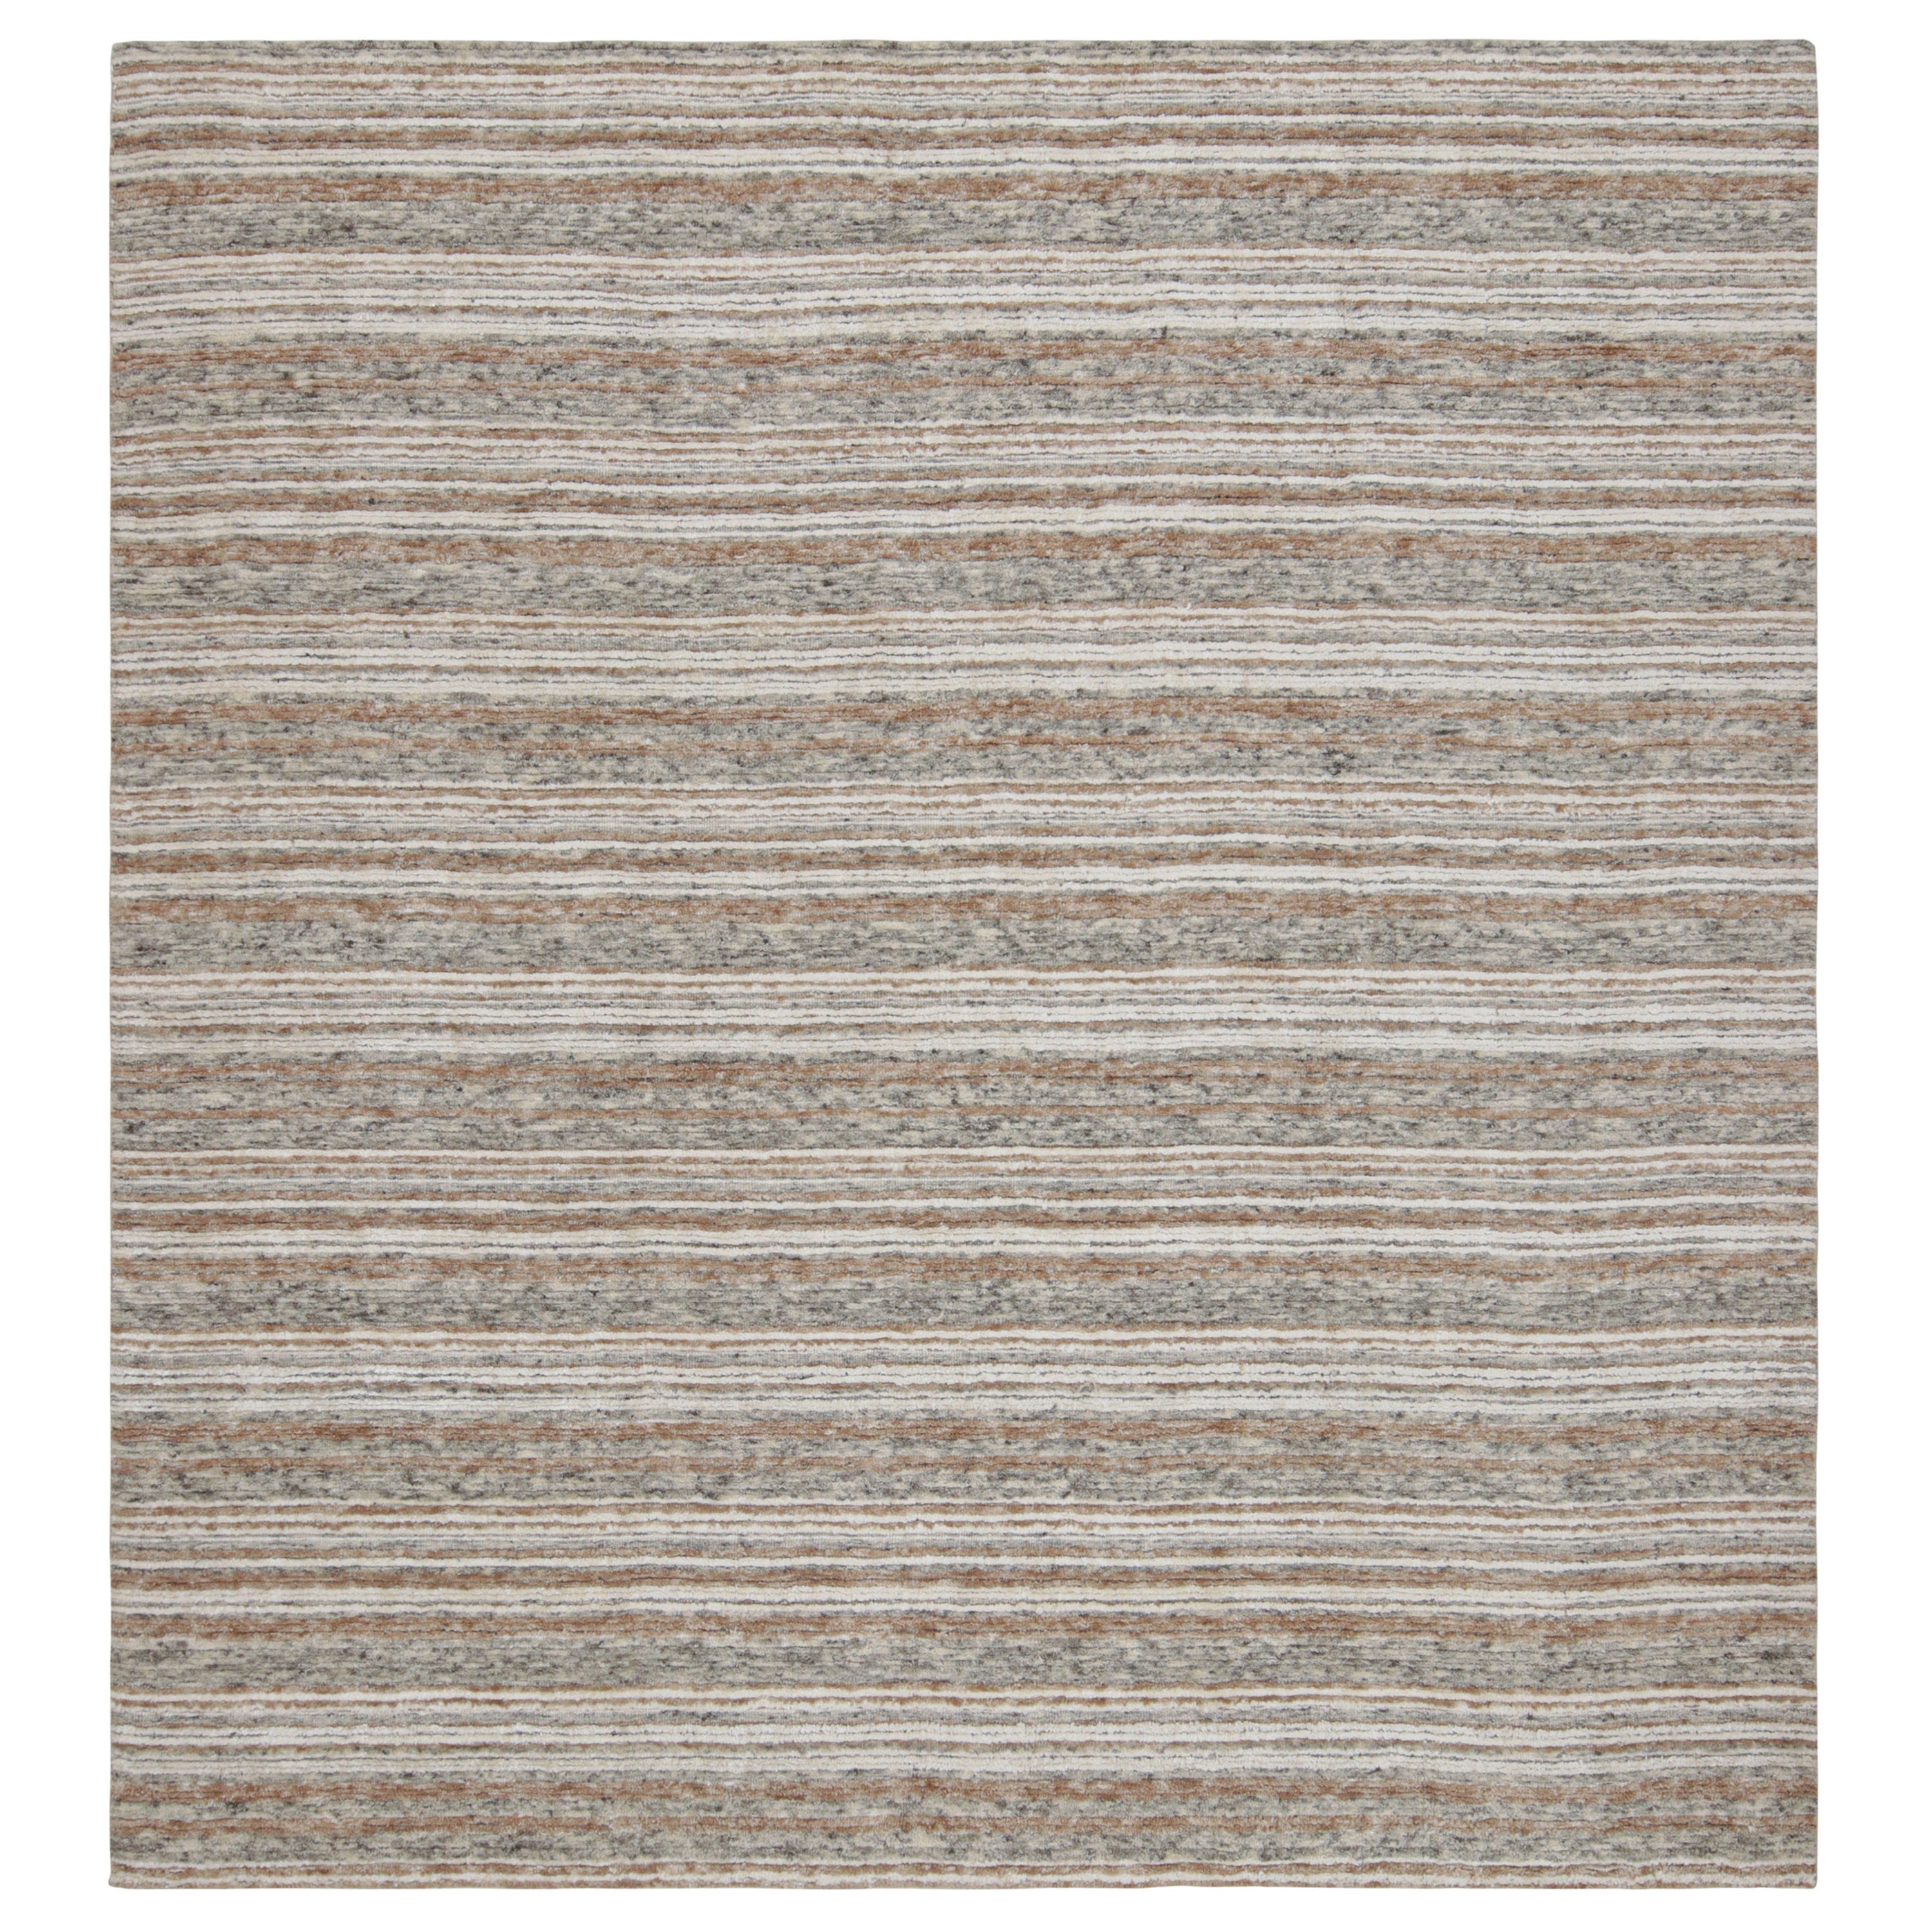 Rug & Kilim’s Textural Rug with Beige-Brown and Gray Stripes “Light on Loom” For Sale